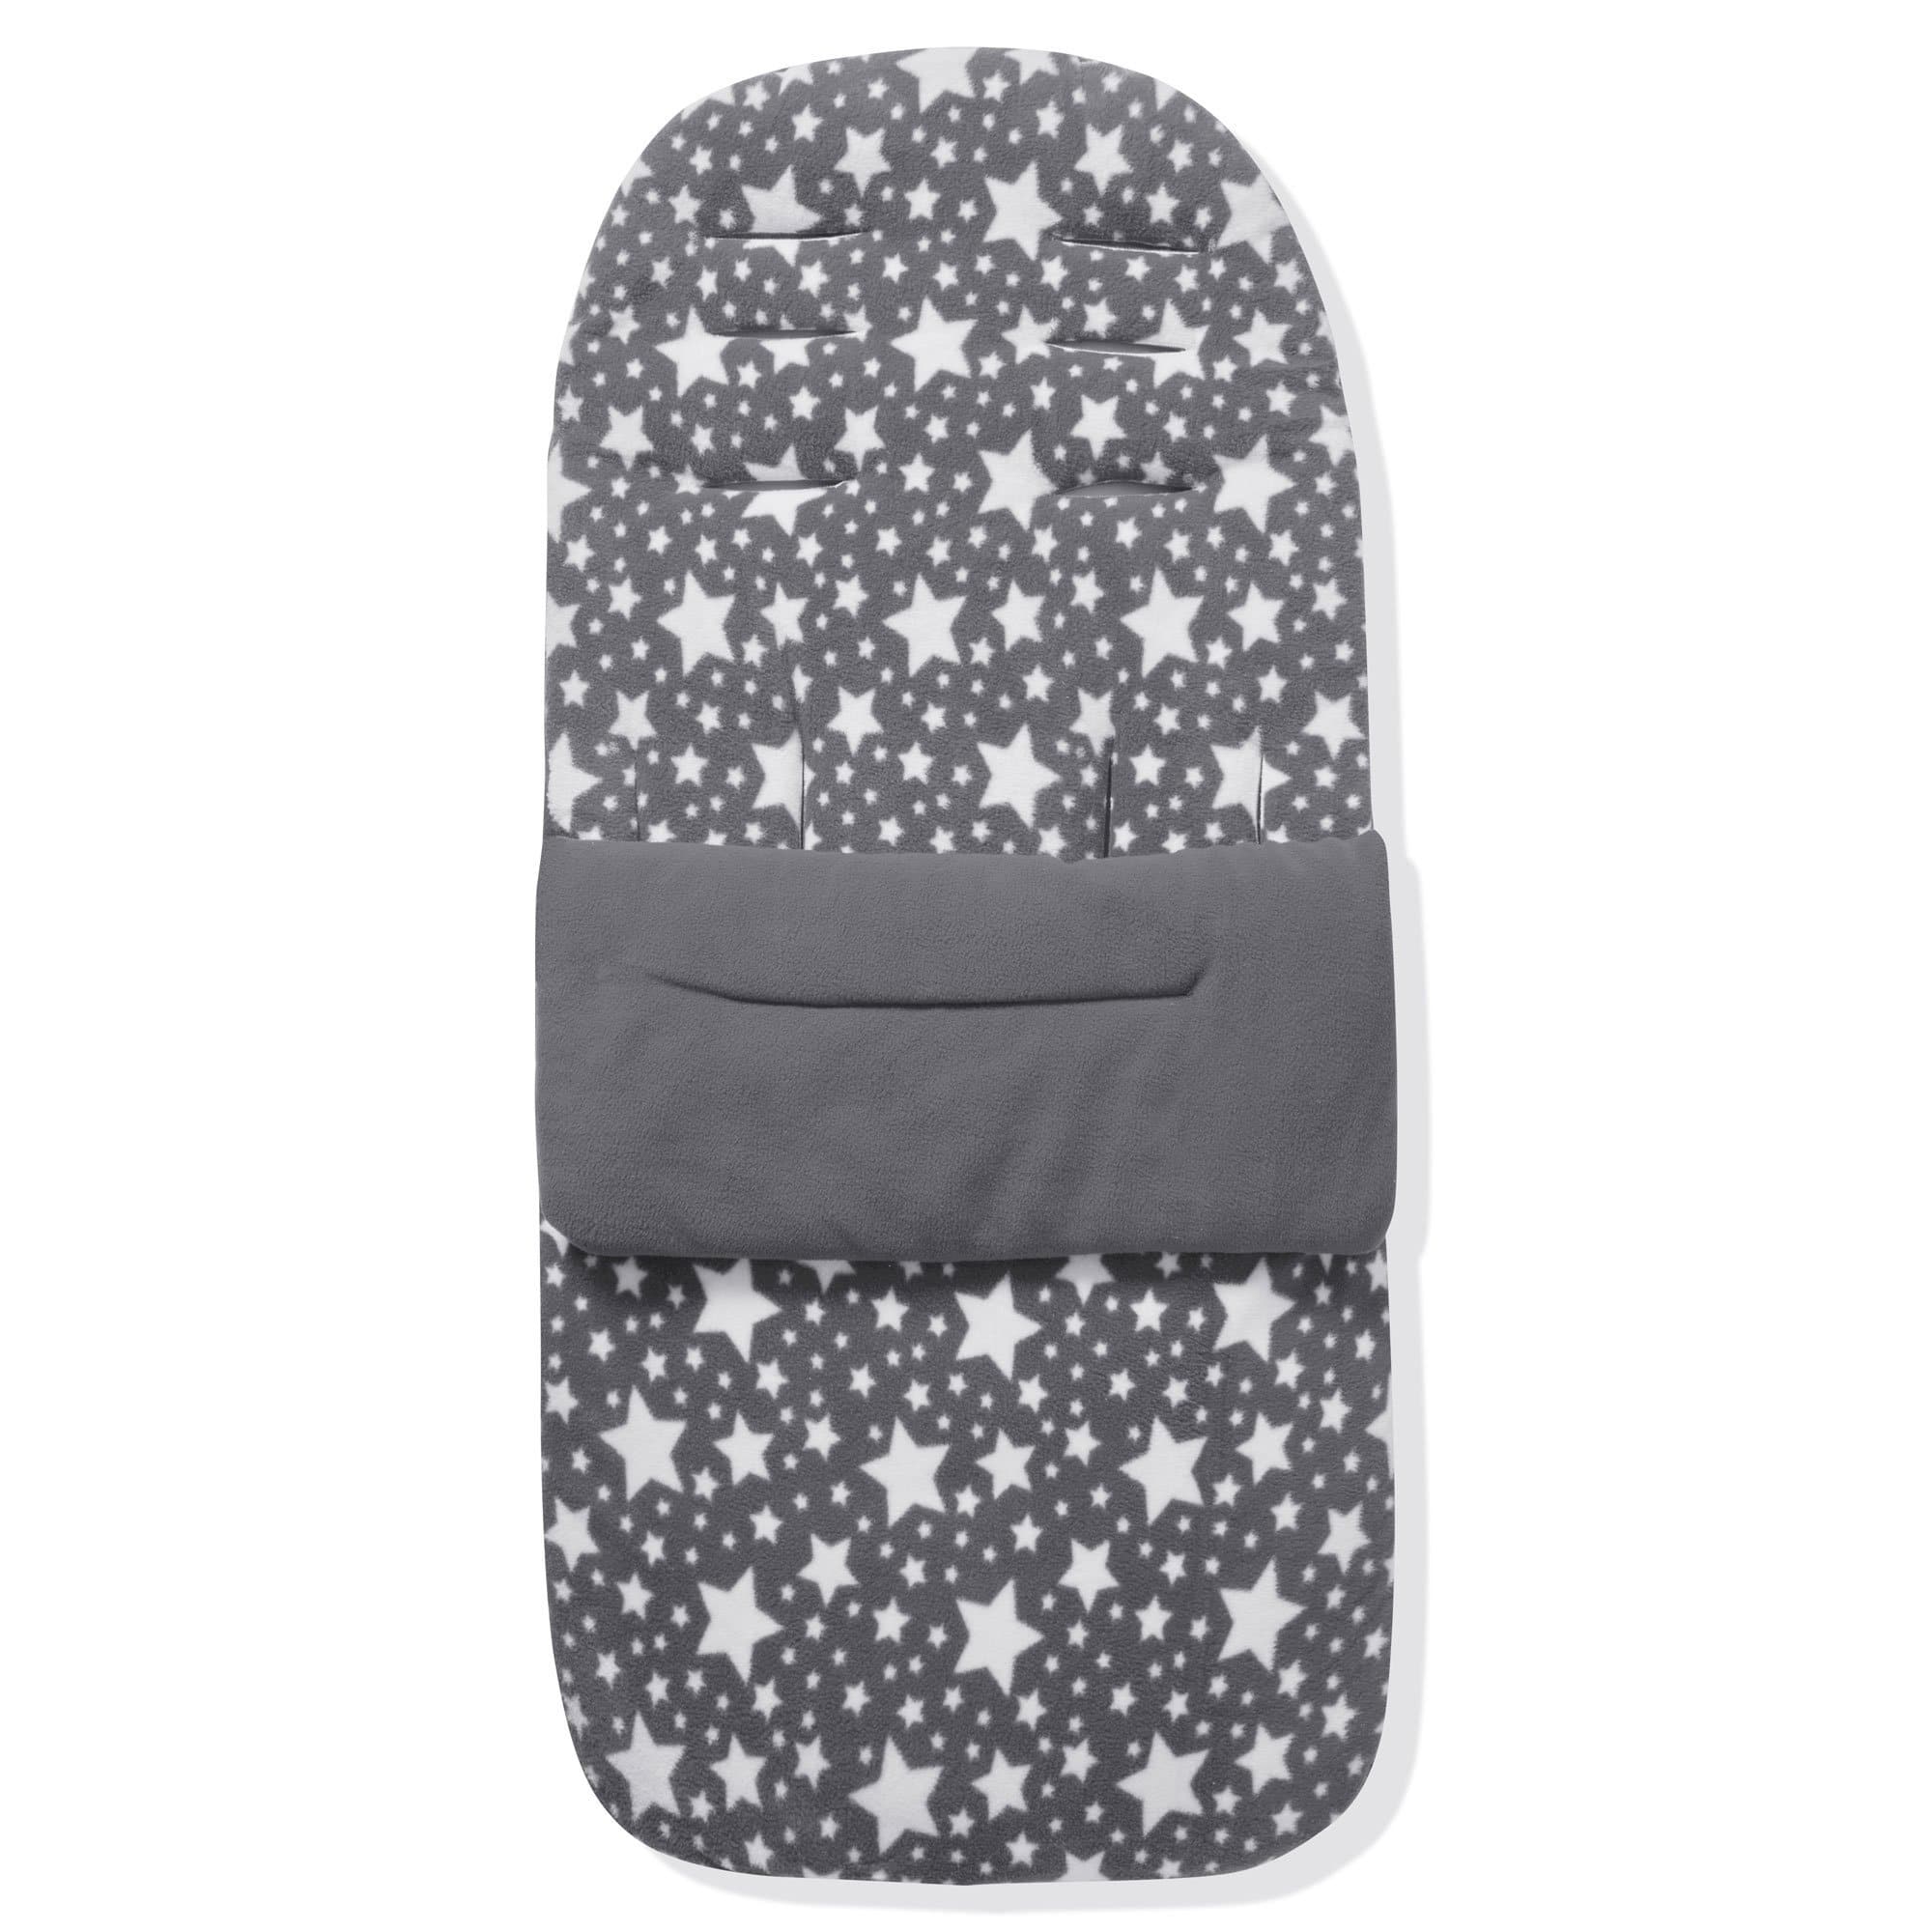 Fleece Footmuff / Cosy Toes Compatible with Formula - Grey Star / Fits All Models | For Your Little One